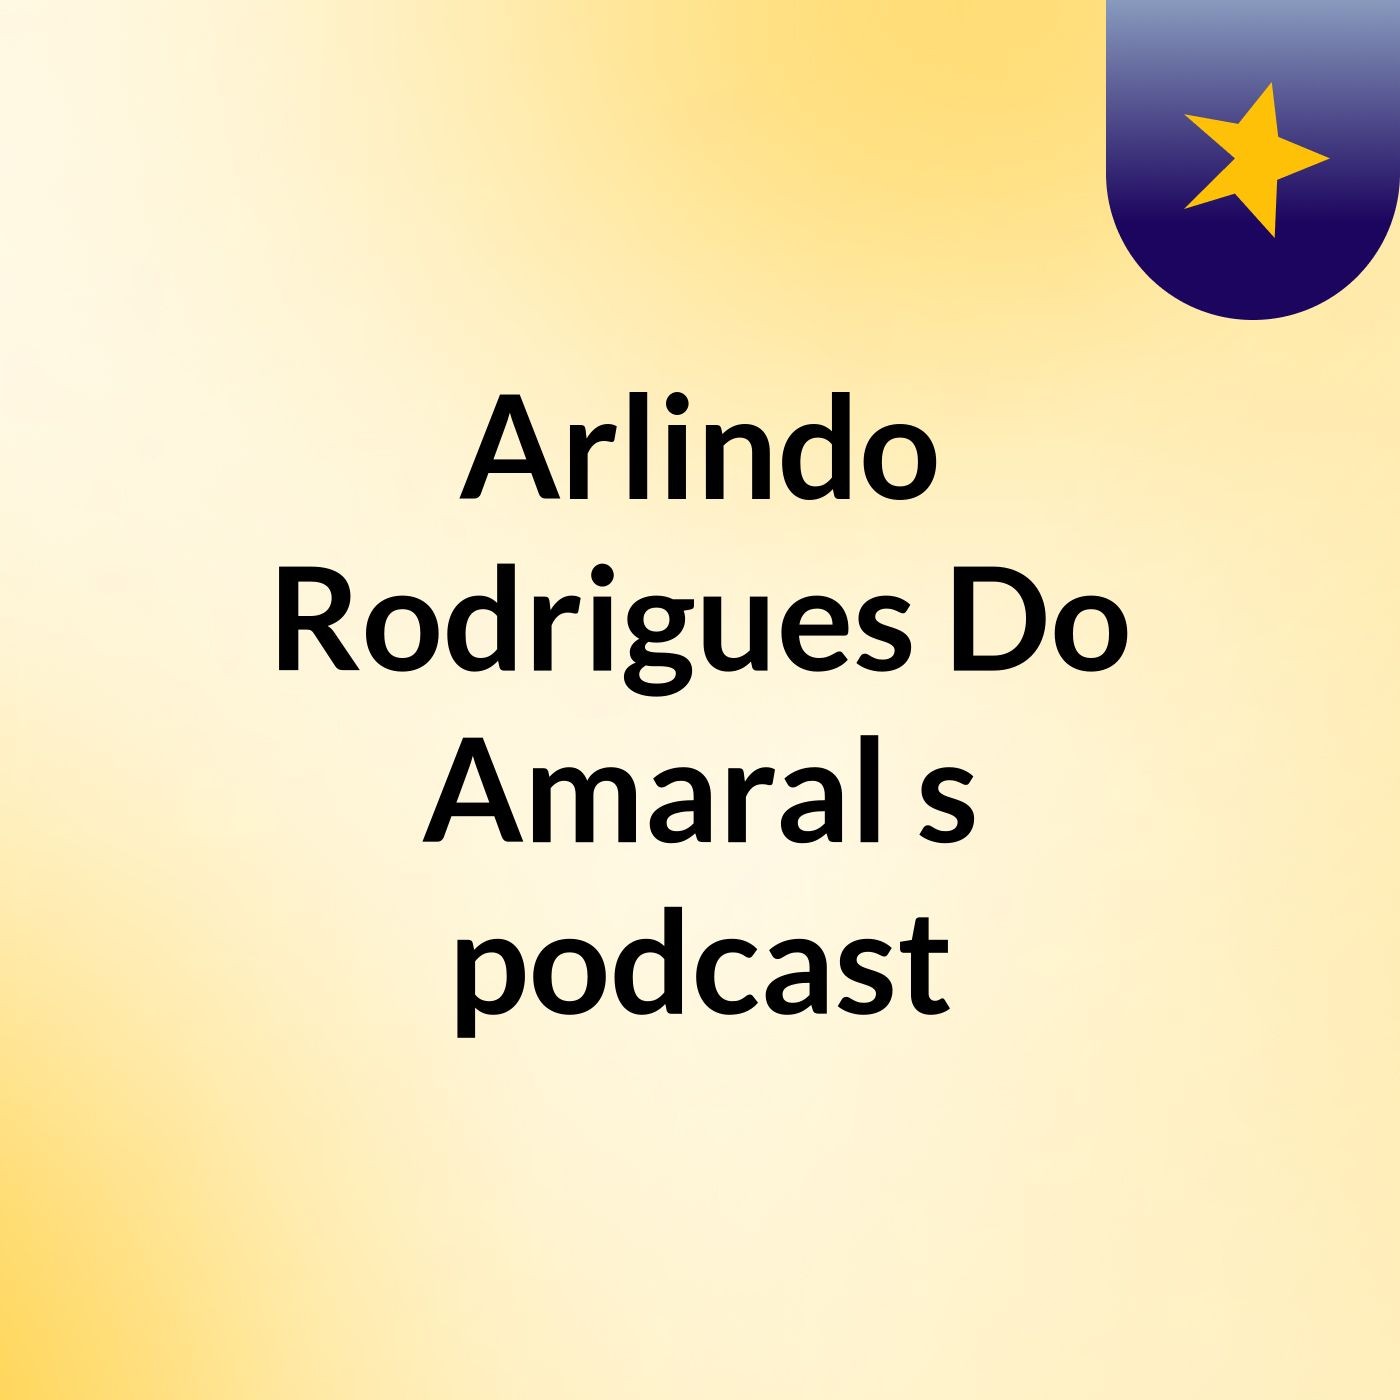 Arlindo Rodrigues Do Amaral's podcast